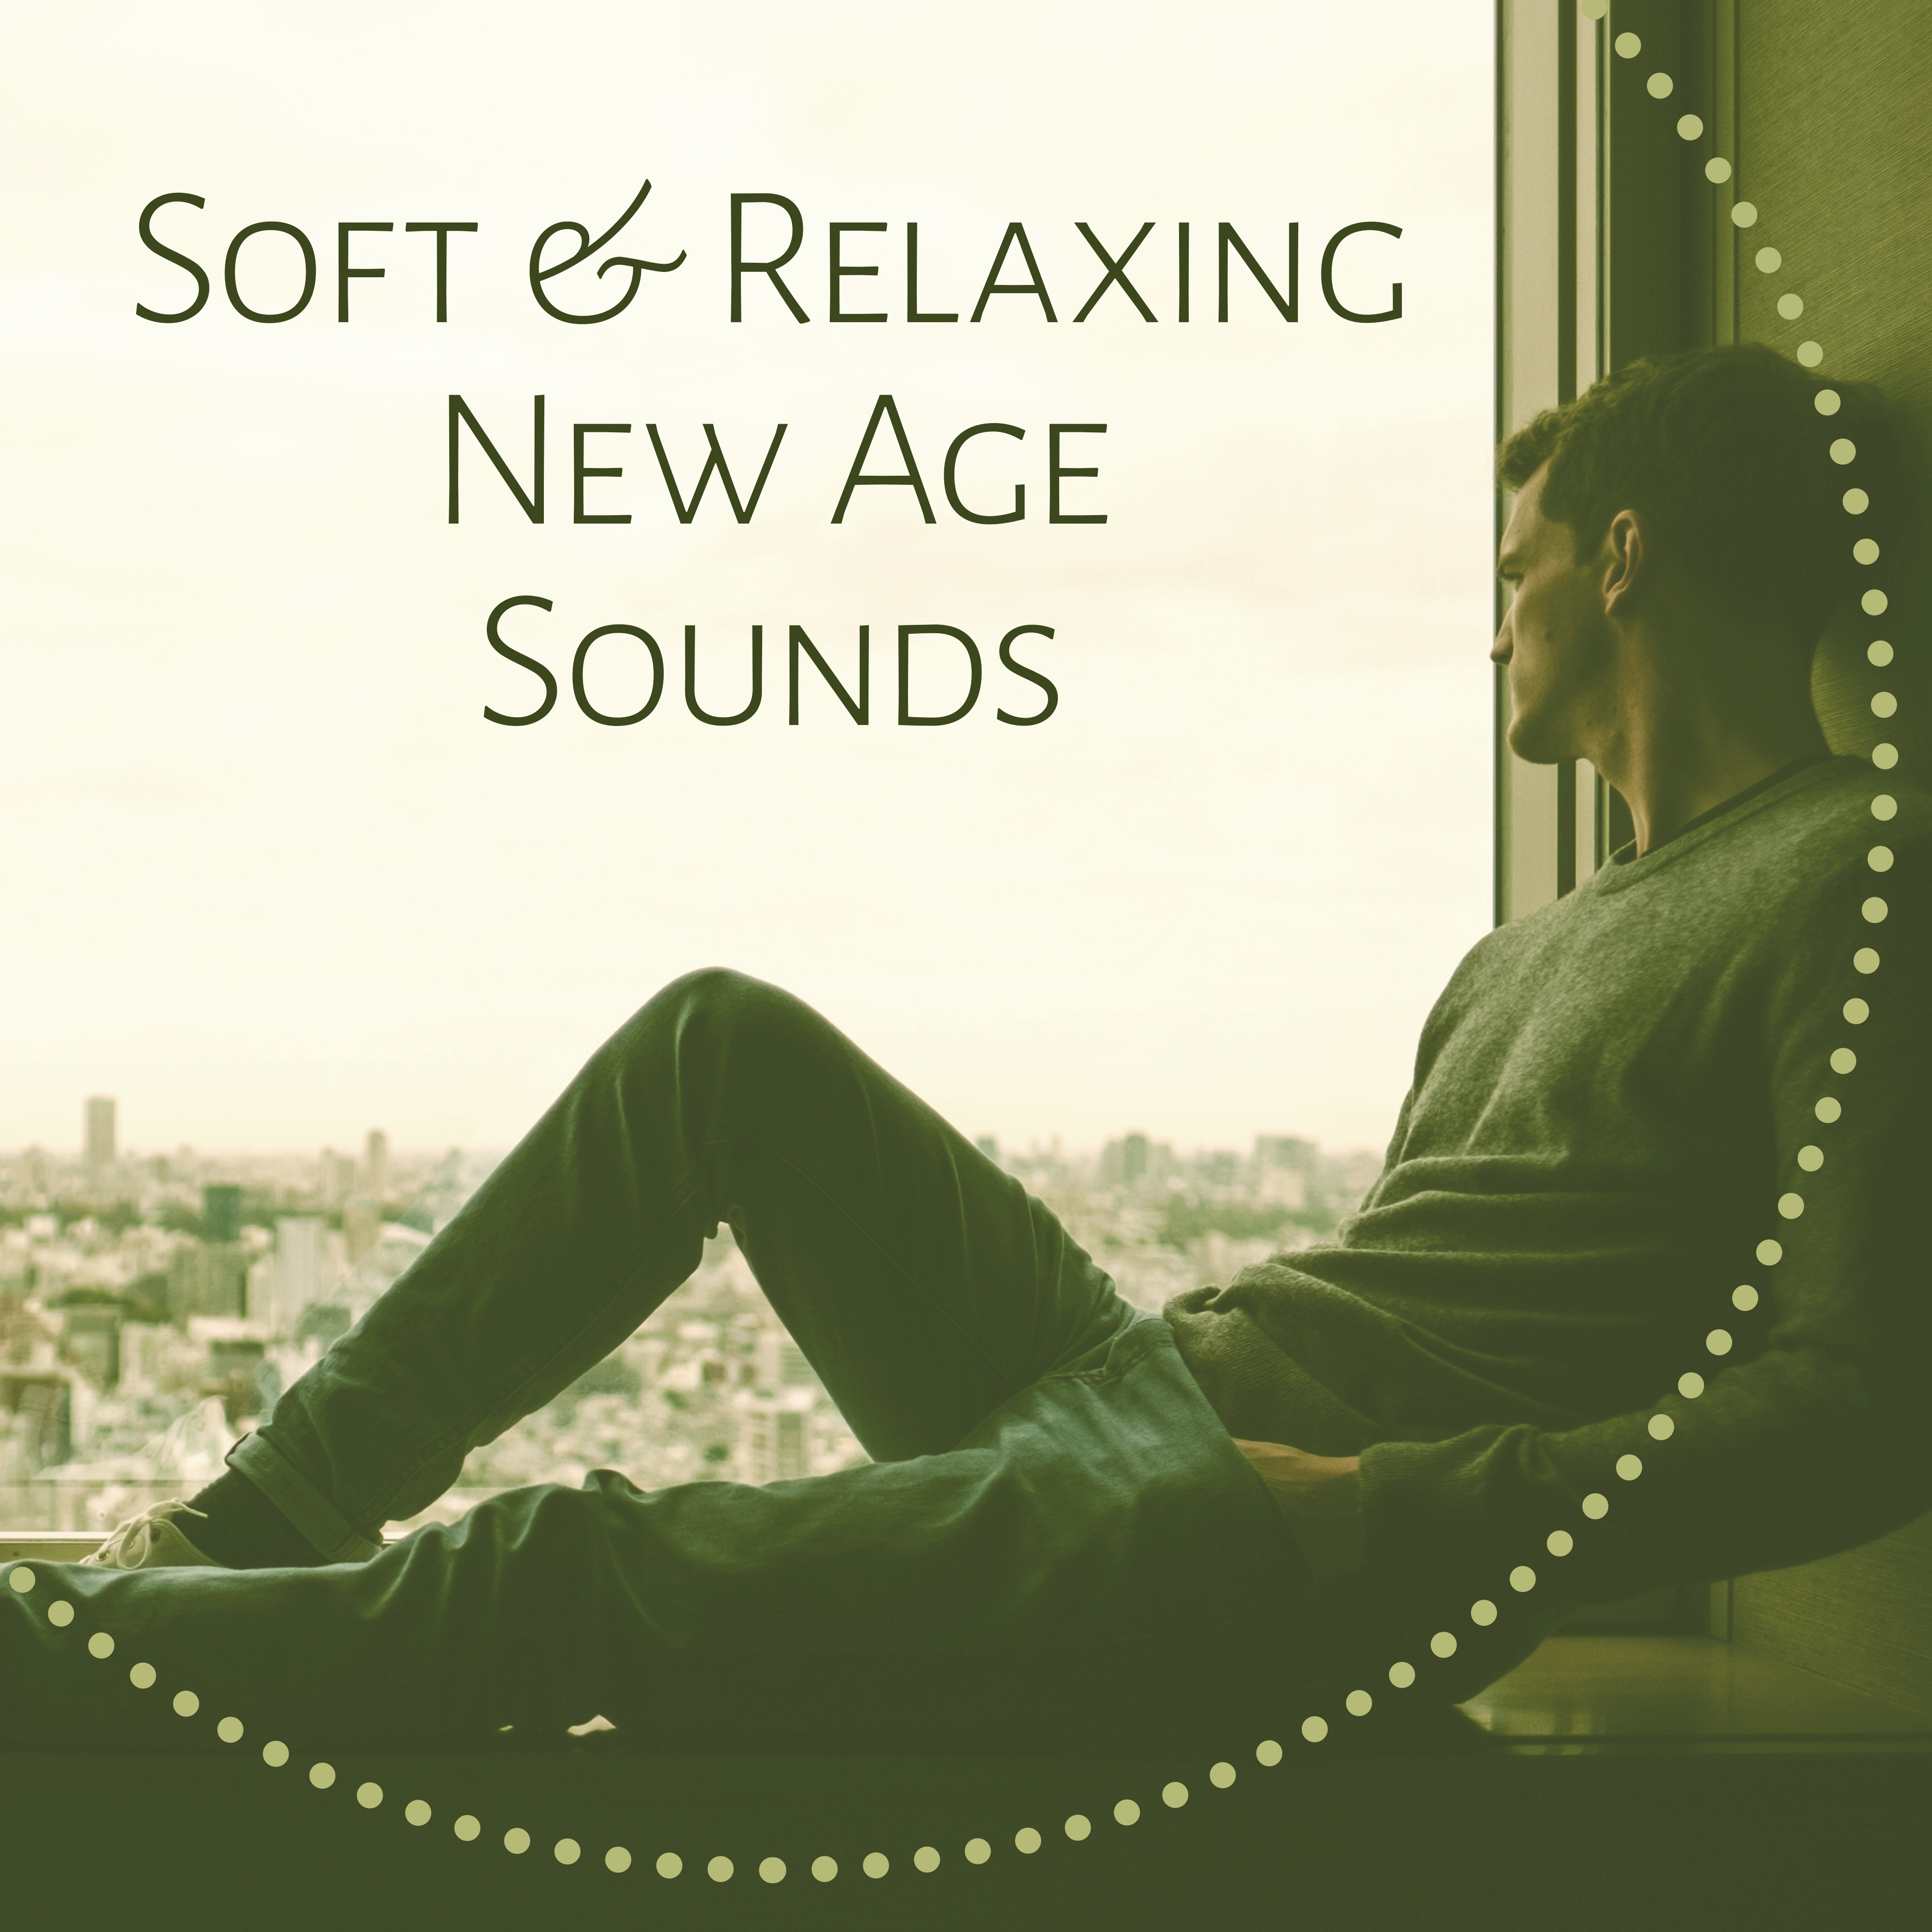 Soft & Relaxing New Age Sounds – Music to Calm Down, Stress Relief, Soothing Waves, Healing Therapy